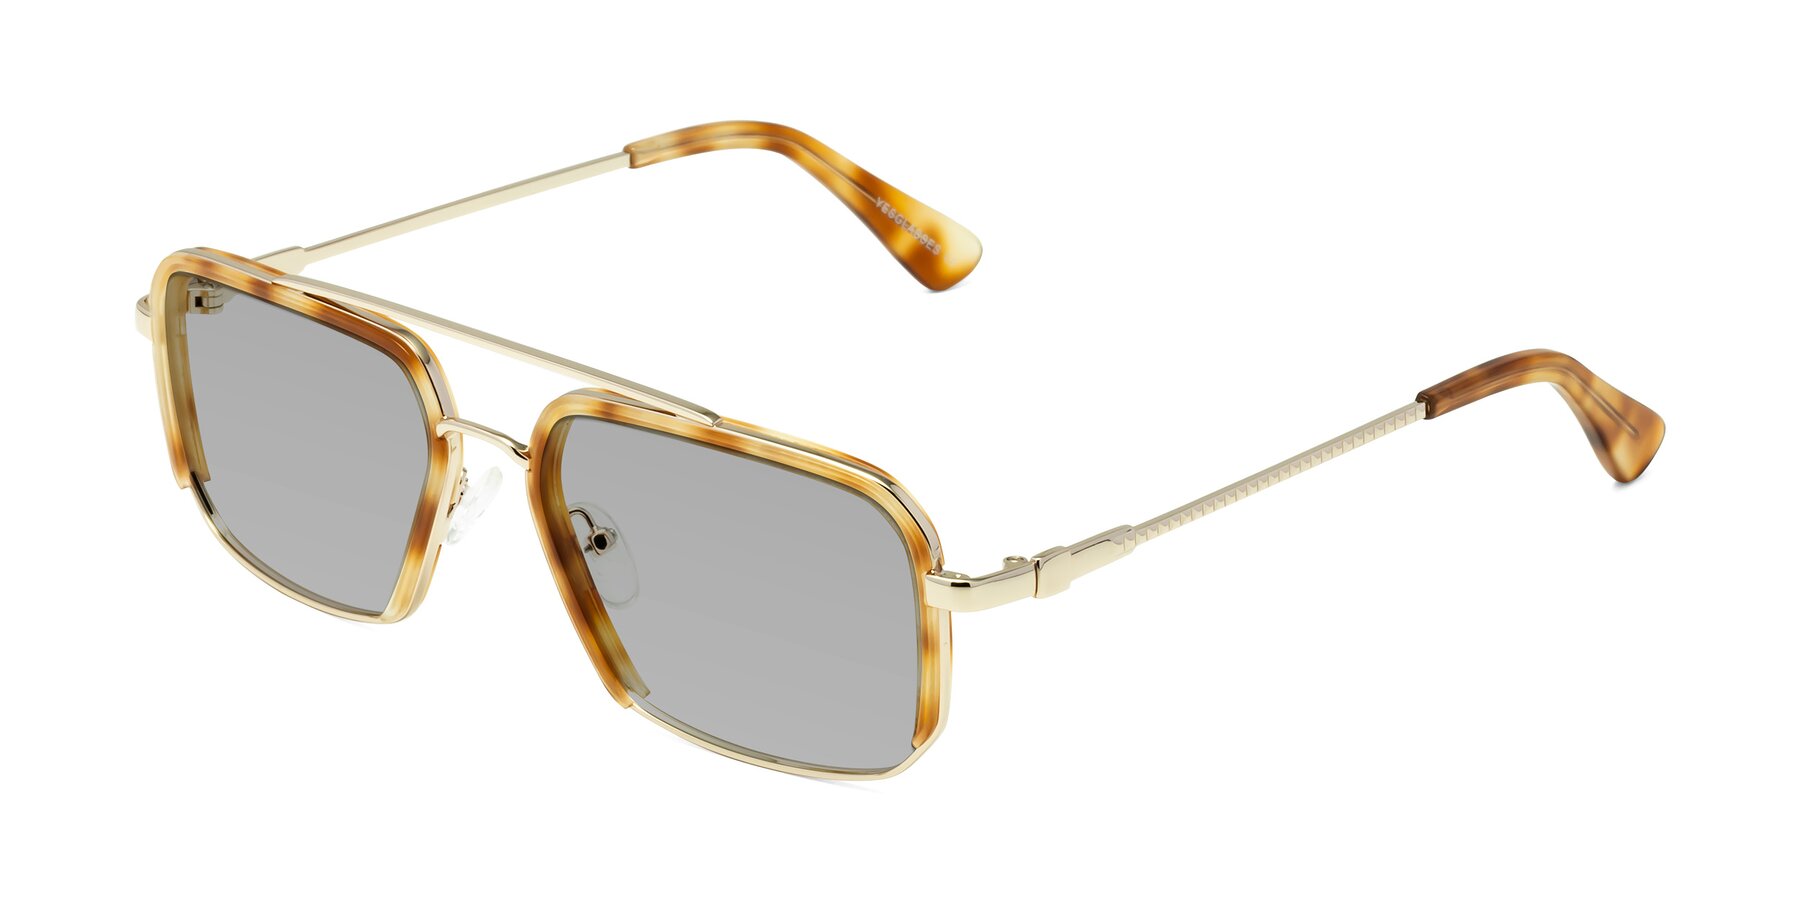 Angle of Dechter in Yellow Tortoise-Gold with Light Gray Tinted Lenses